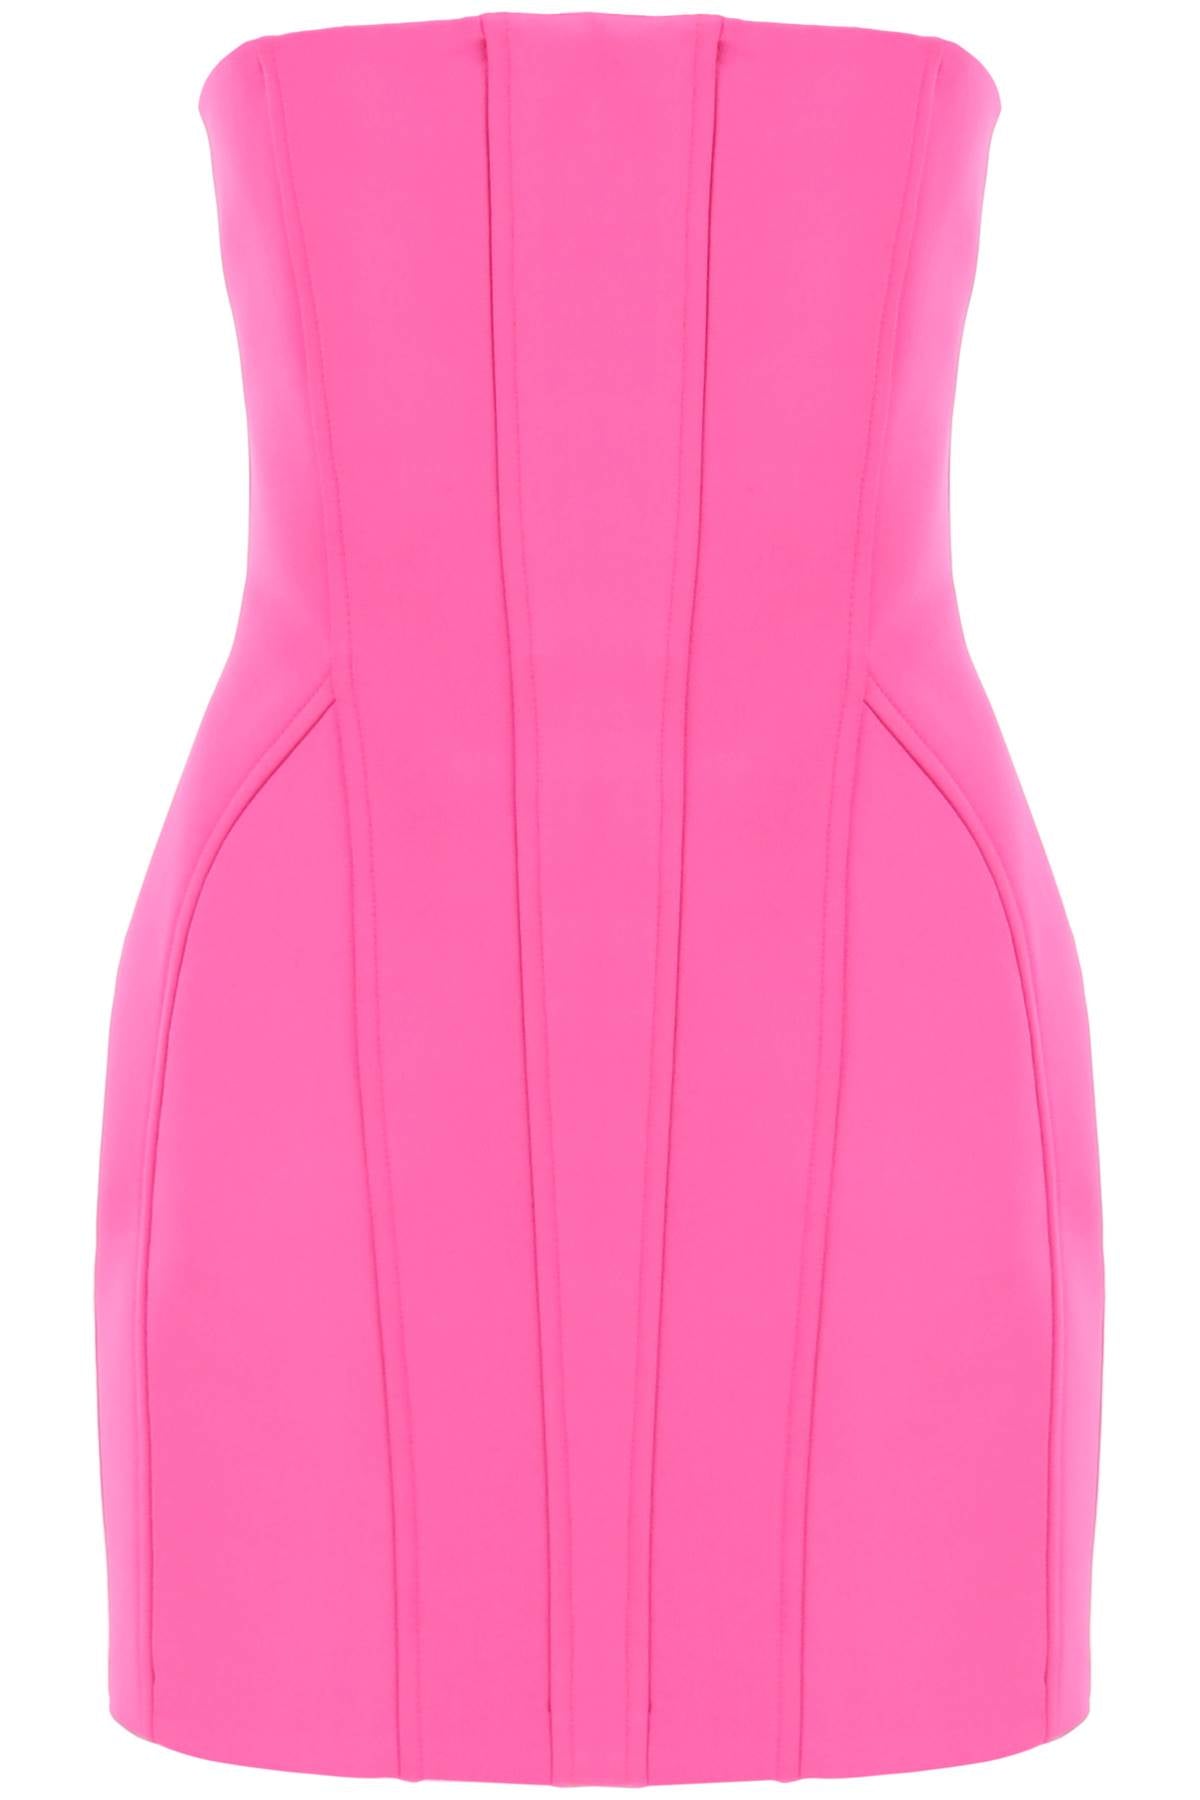 structured mini dress with a 02PSDR342 02109 HOT PINK